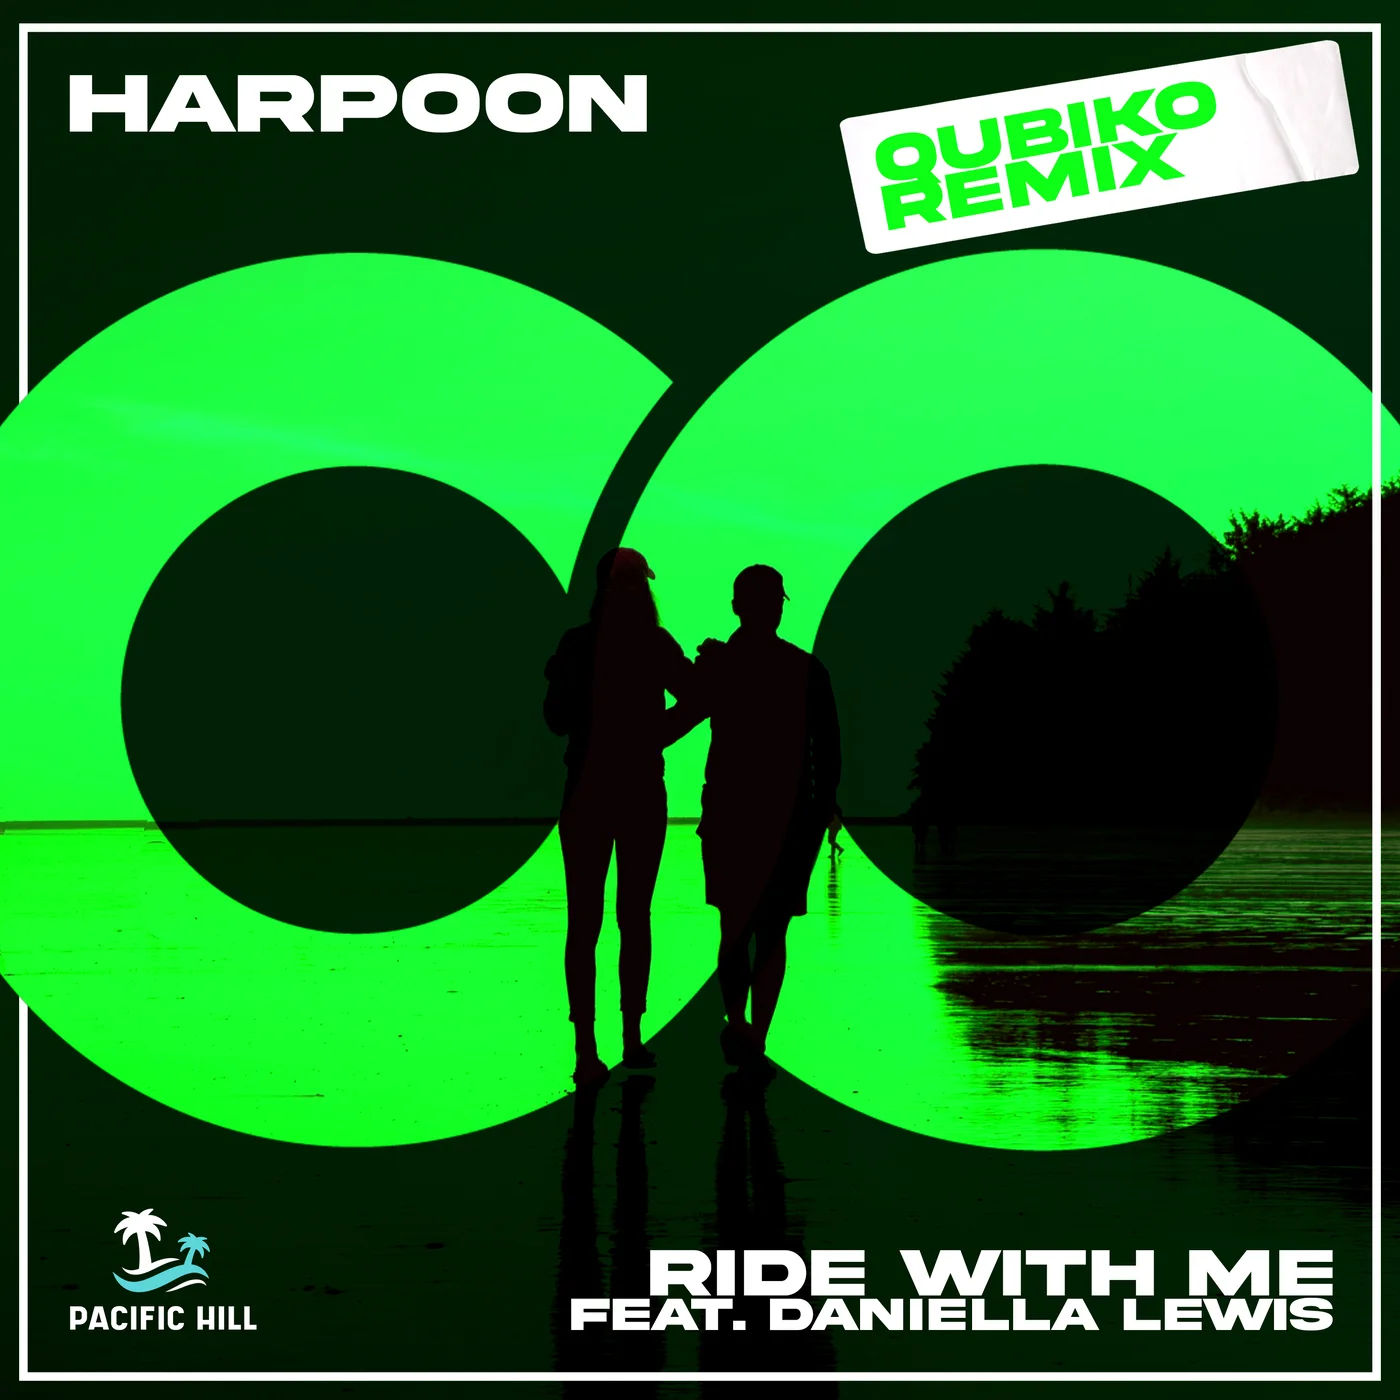 Harpoon - Ride With Me Feat. Daniella Lewis (Qubiko Extended Remix)